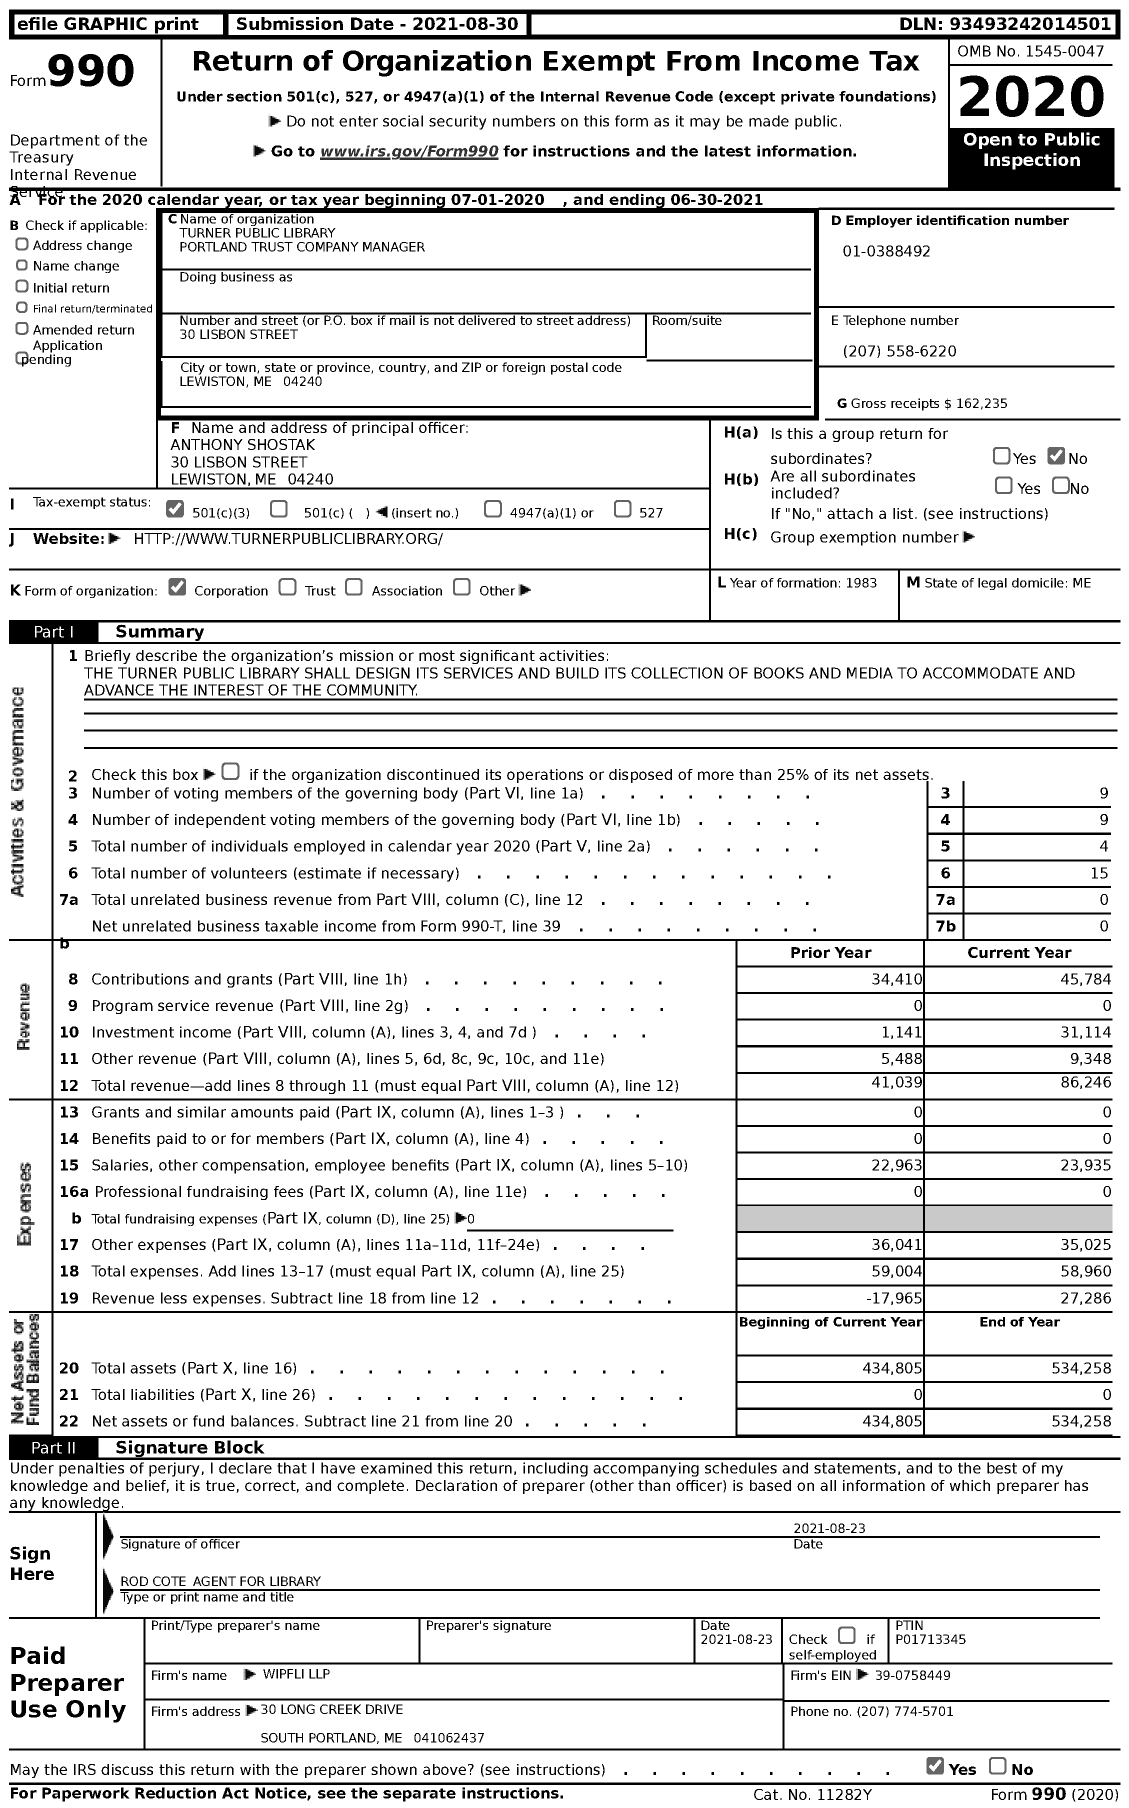 Image of first page of 2020 Form 990 for Turner Public Library Portland Trust Company Manager